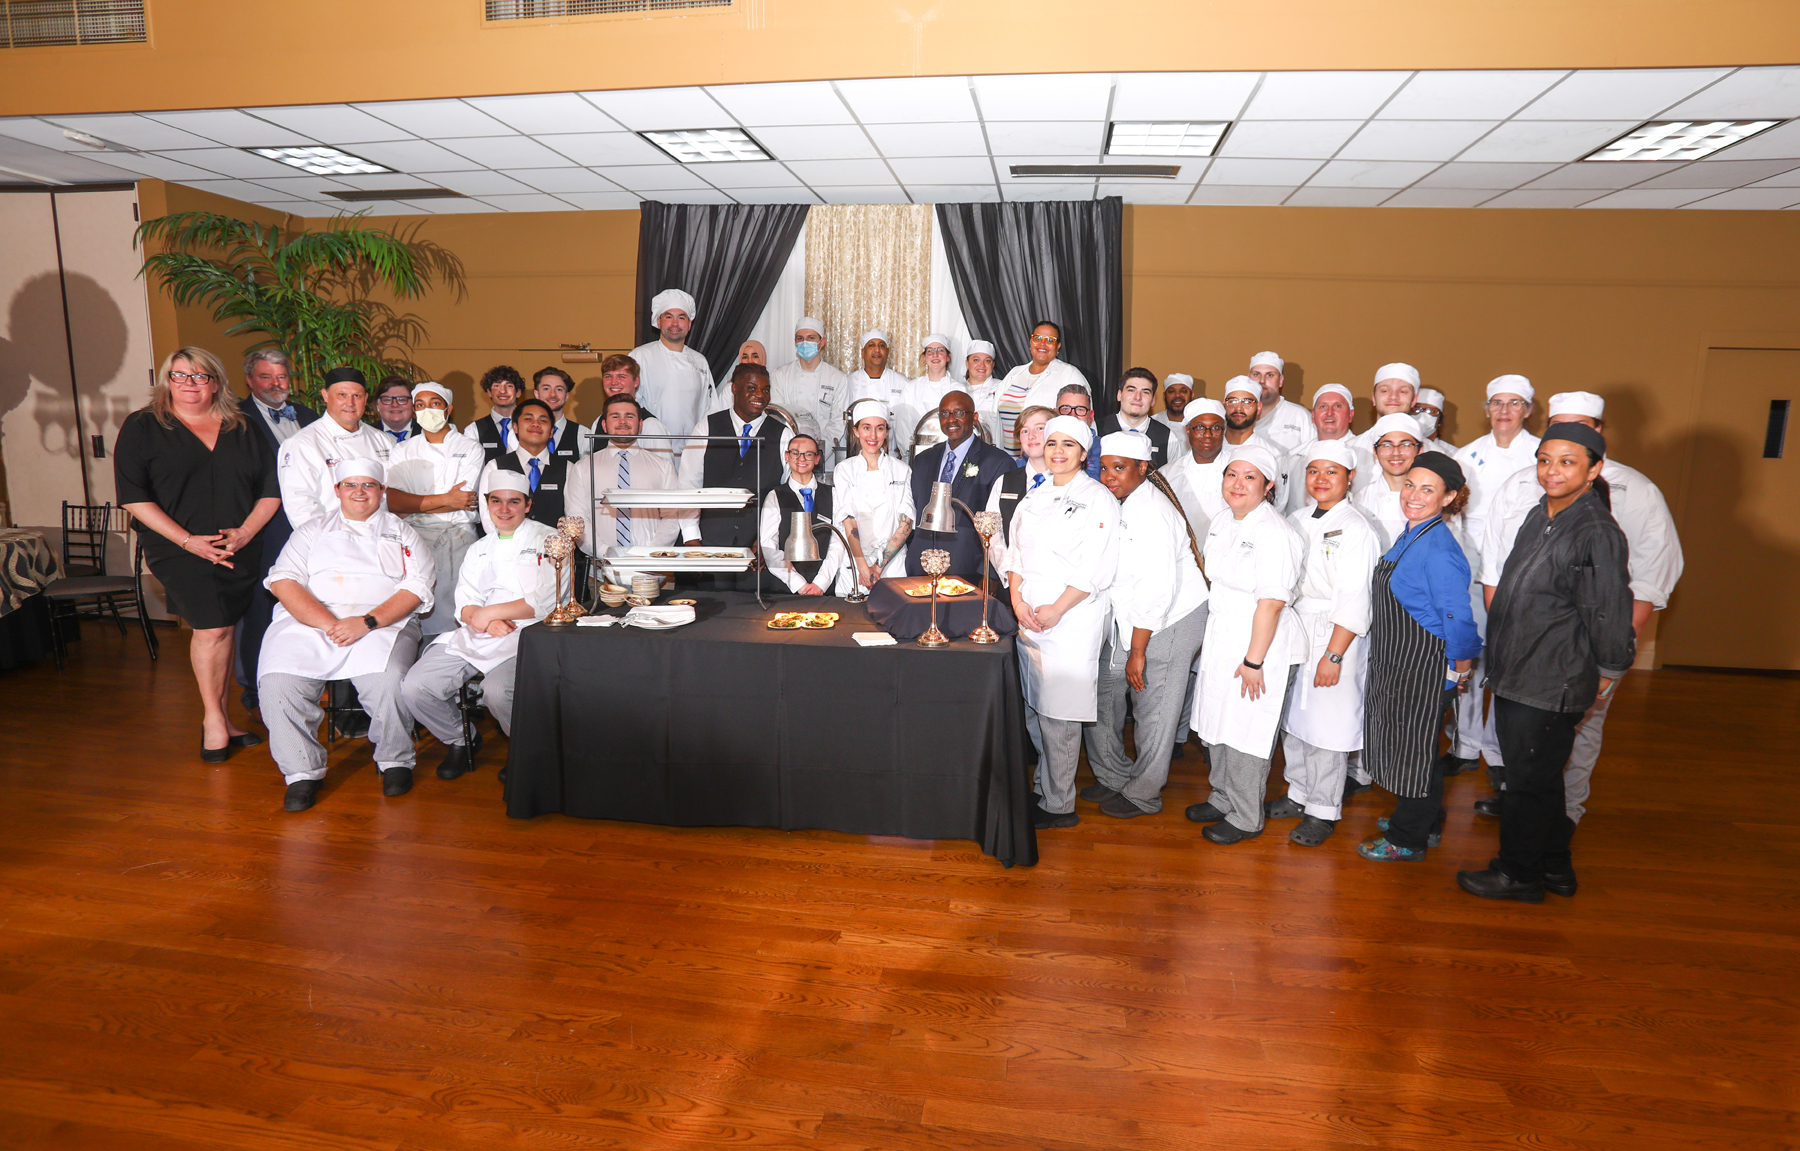 Student chefs, Dr. Moono and faculty posing for photo in Van Curler Room